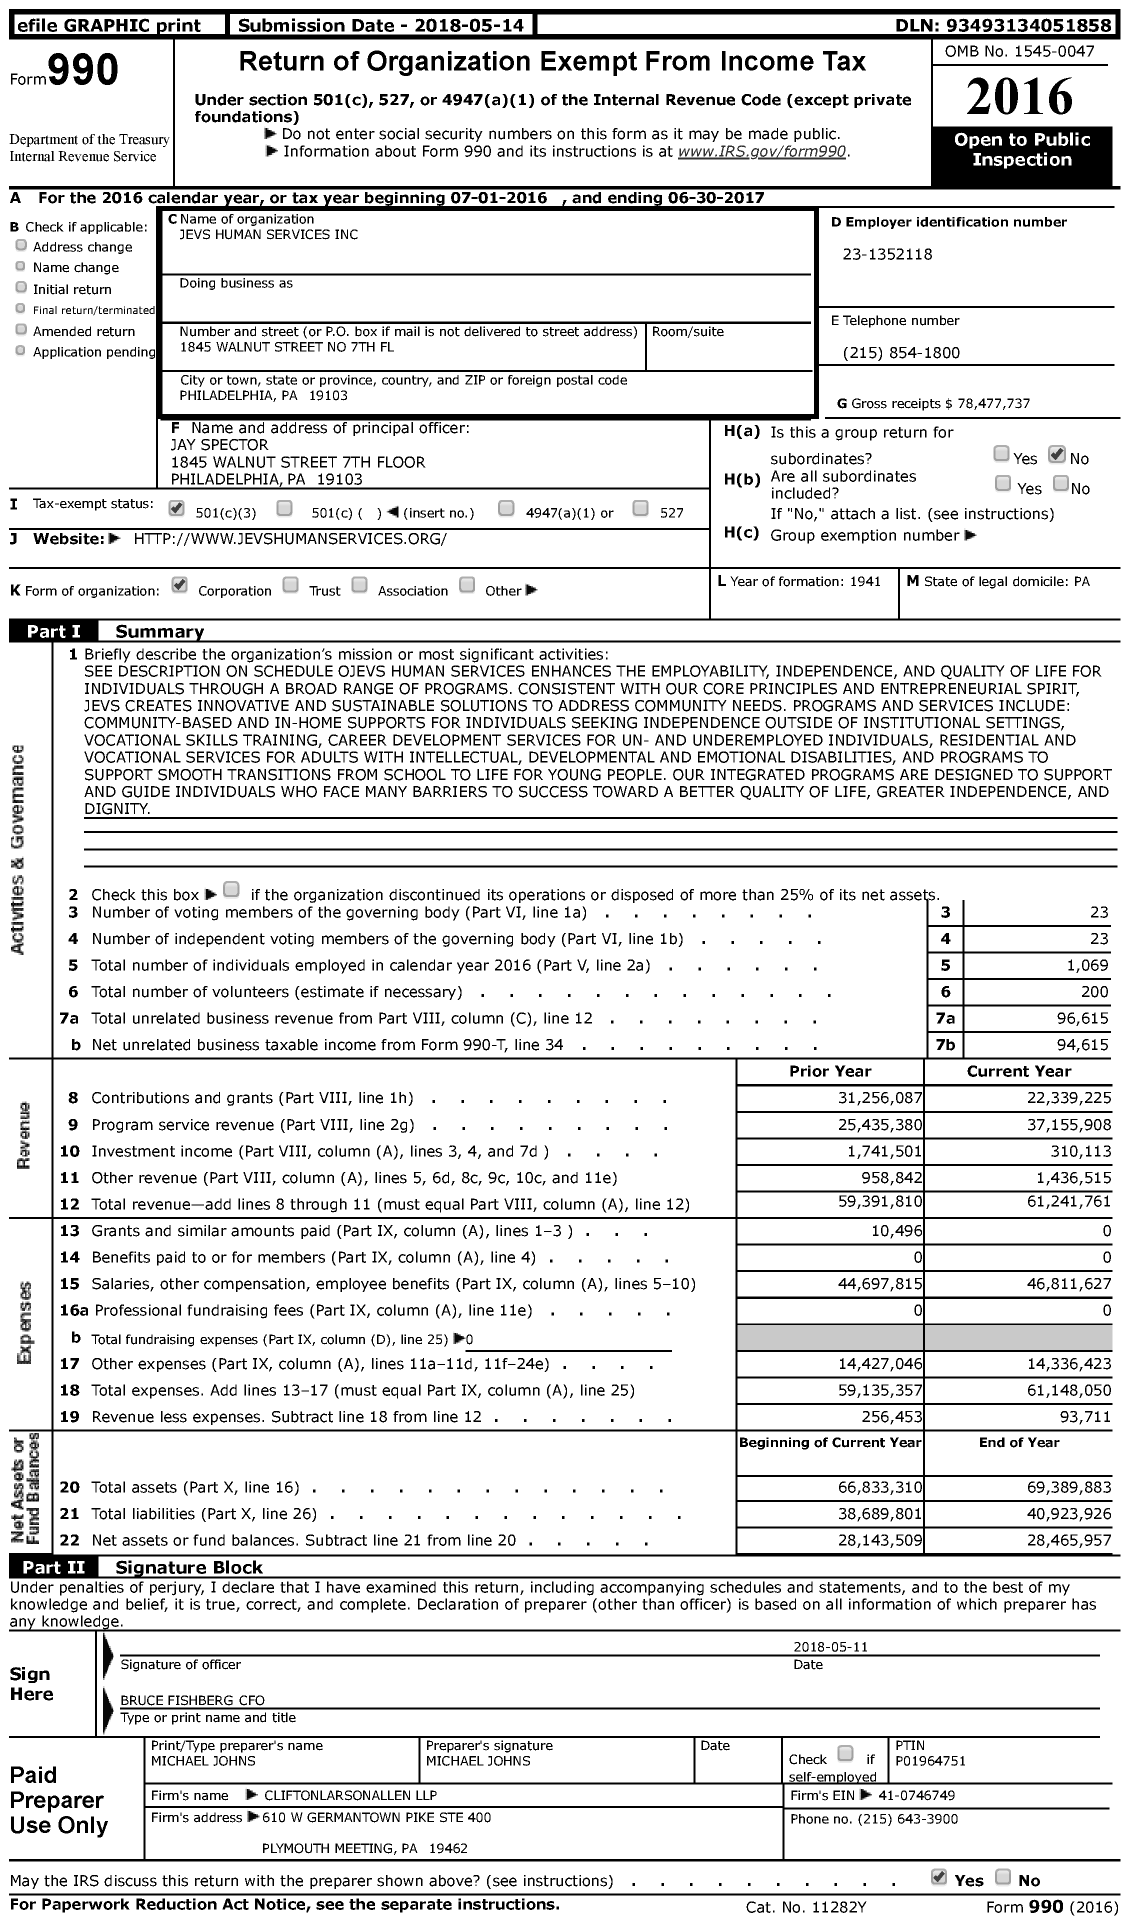 Image of first page of 2016 Form 990 for Jevs Human Services